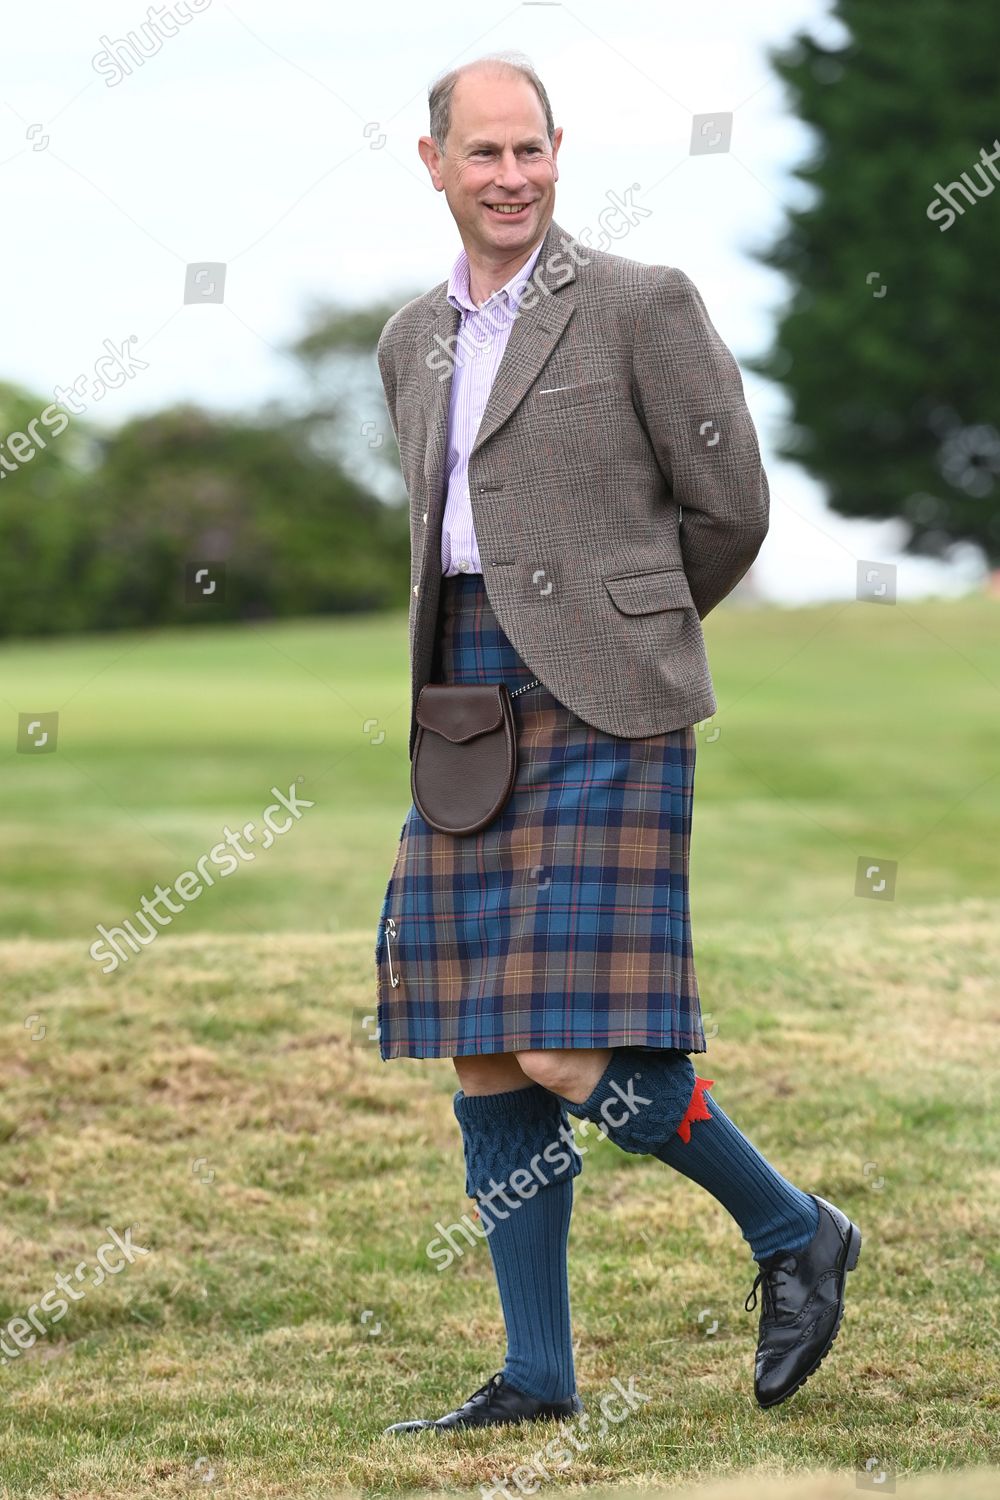 prince-edward-and-sophie-countess-of-wessex-visit-to-forfar-golf-club-scotland-uk-shutterstock-editorial-12172307h.jpg